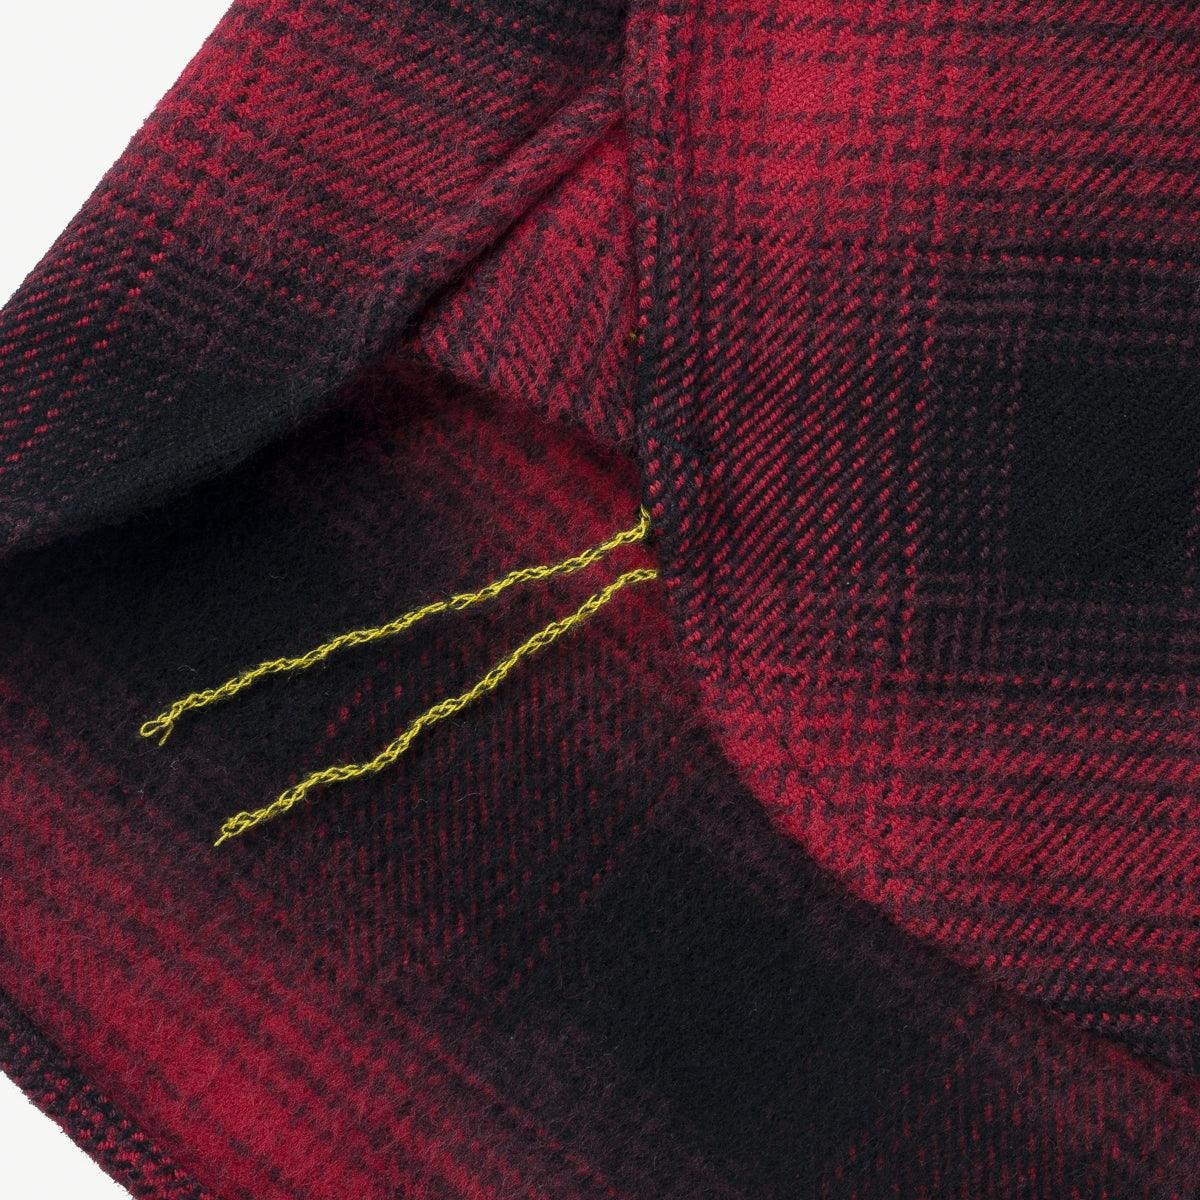 Image showing the IHSH-265-RED - Ultra Heavy Flannel Ombré Check Work Shirt - Red/Black which is a Shirts described by the following info Iron Heart, New, Released, Shirts, Tops and sold on the IRON HEART GERMANY online store